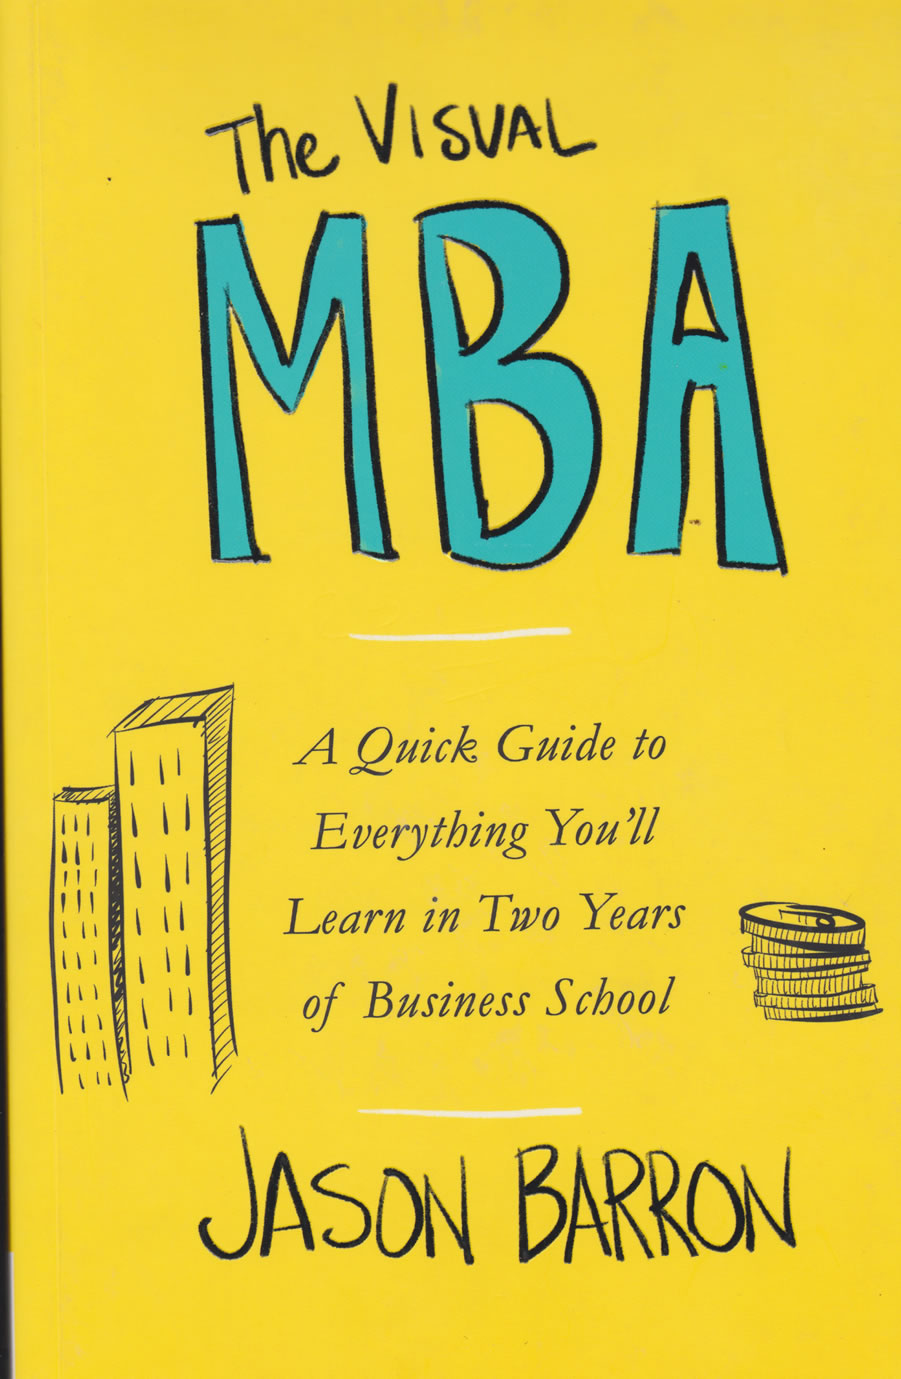 The Visual MBA: Your Shortcut to a World-Class Business Education